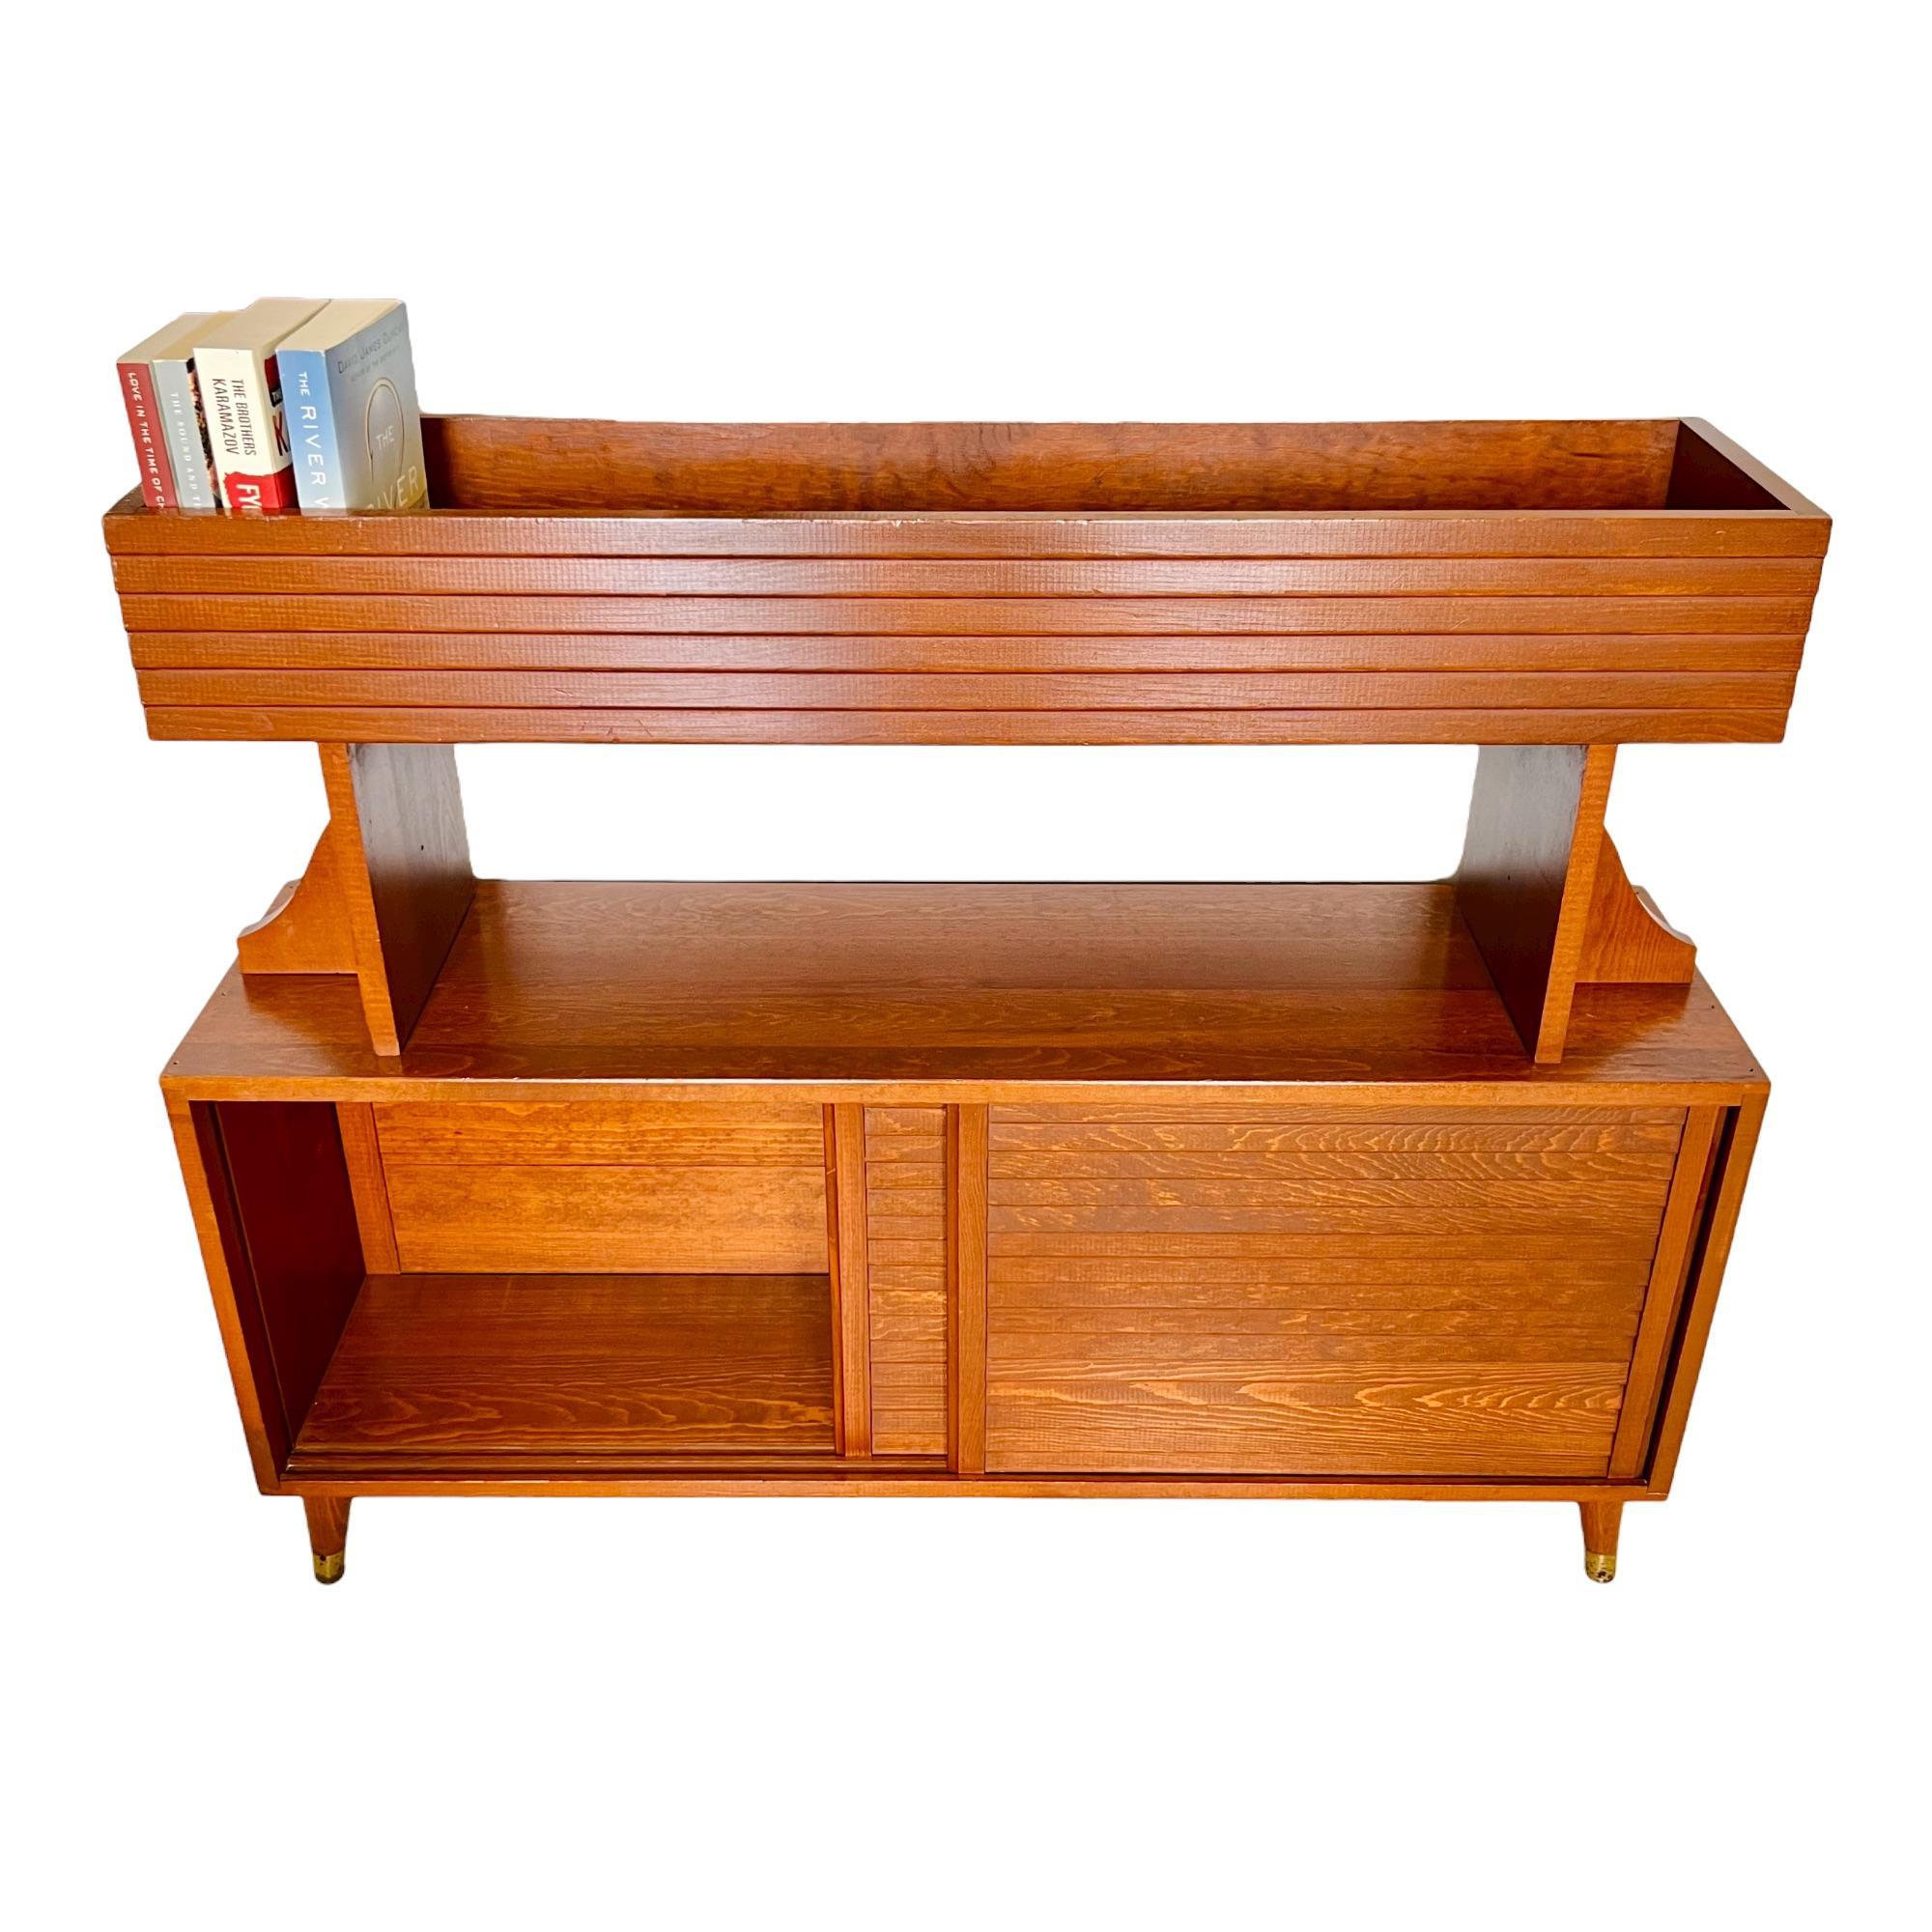 A vintage Mid-Century Modern teak credenza with upper display shelf. This unique compact piece is finished on both sides and features lower storage with four removable horizontally sliding tambour detail doors and an upper shelf with tamboured